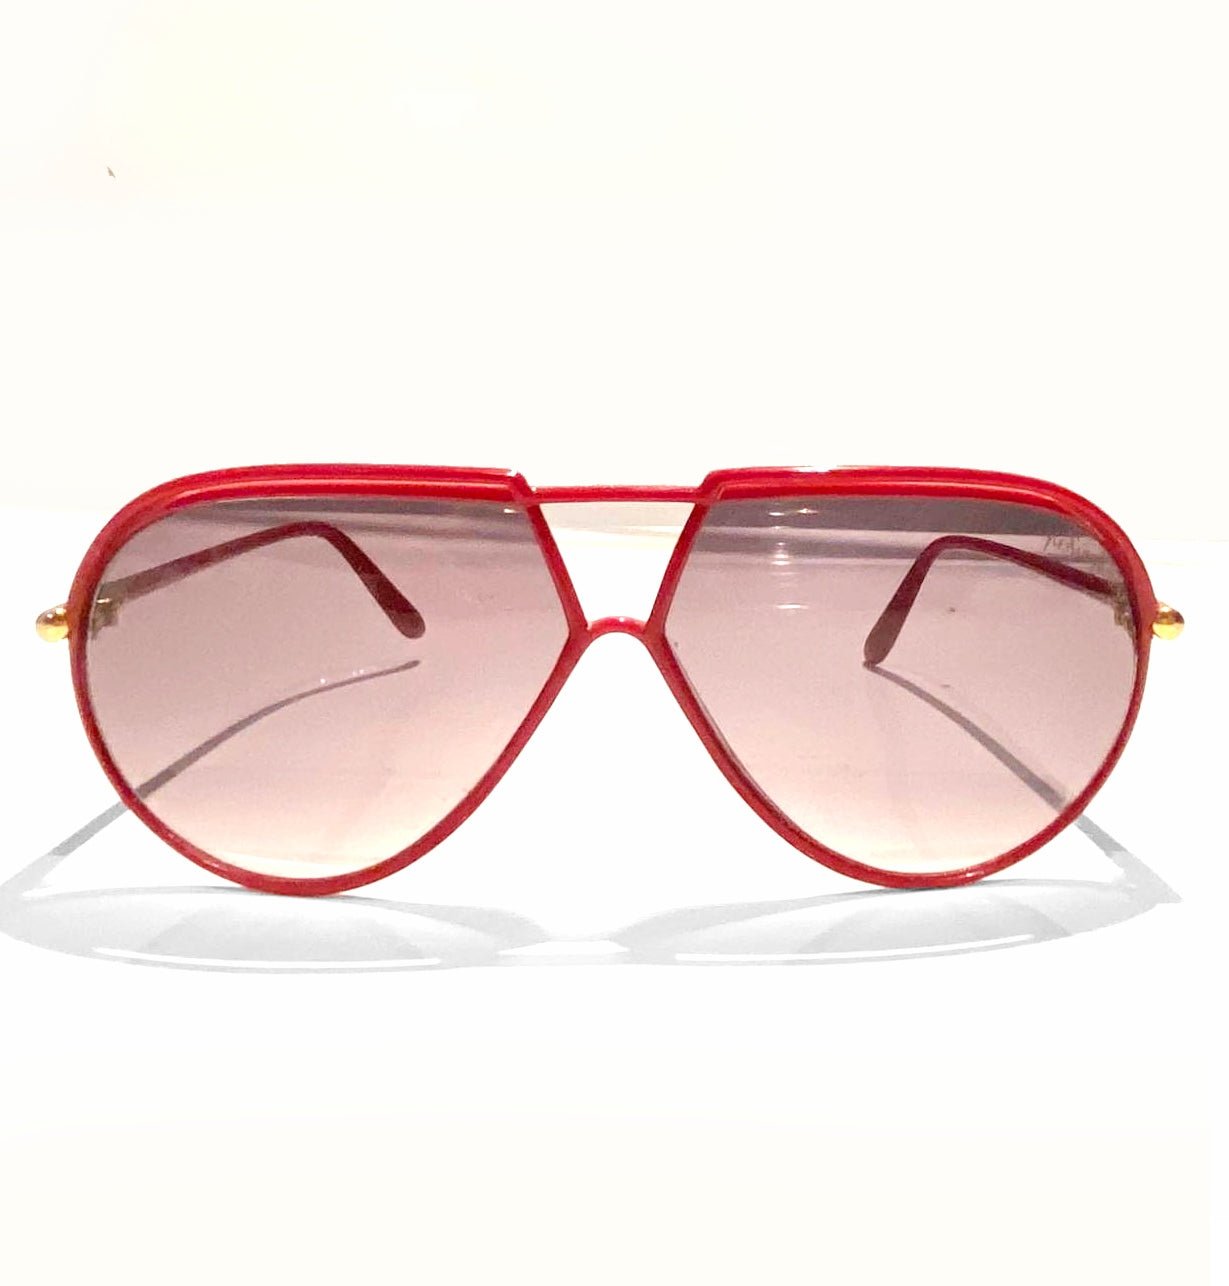 1980s Yves Saint Laurent Red Teardrop with Gradient Lenses Sunglasses - style - CHNGR